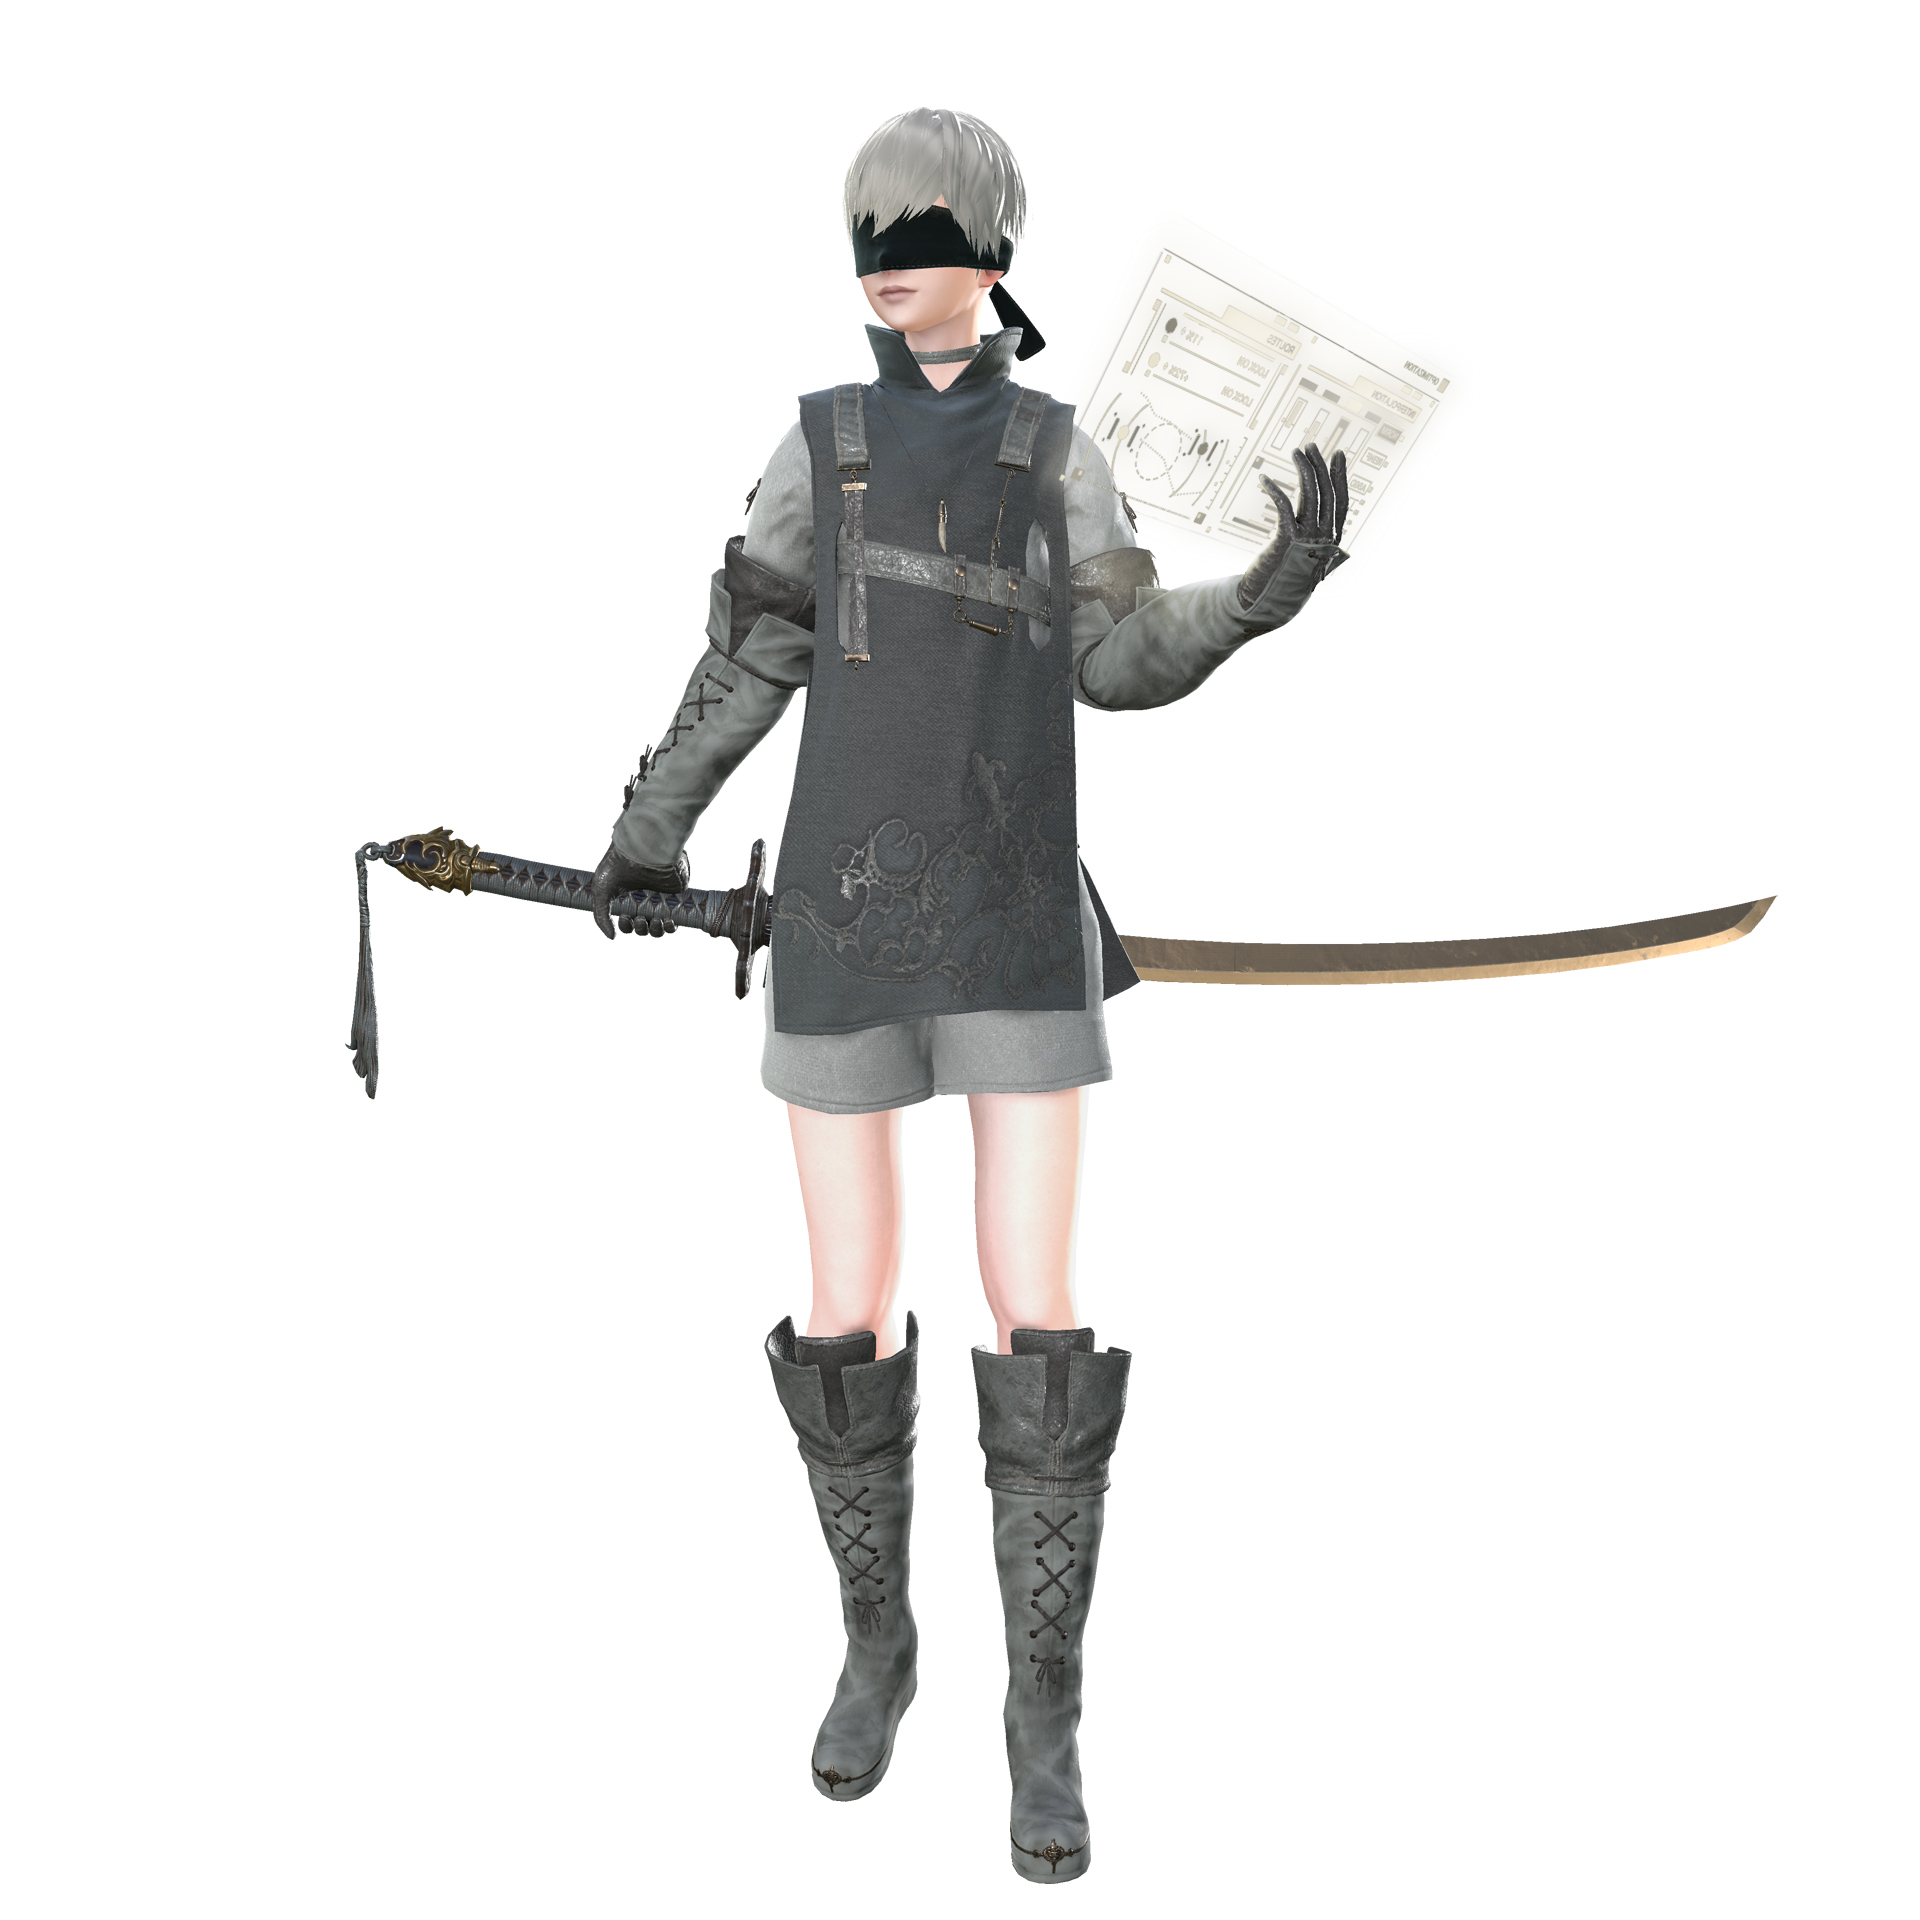 A2 - Destroyer Outfit inspired by Nier.